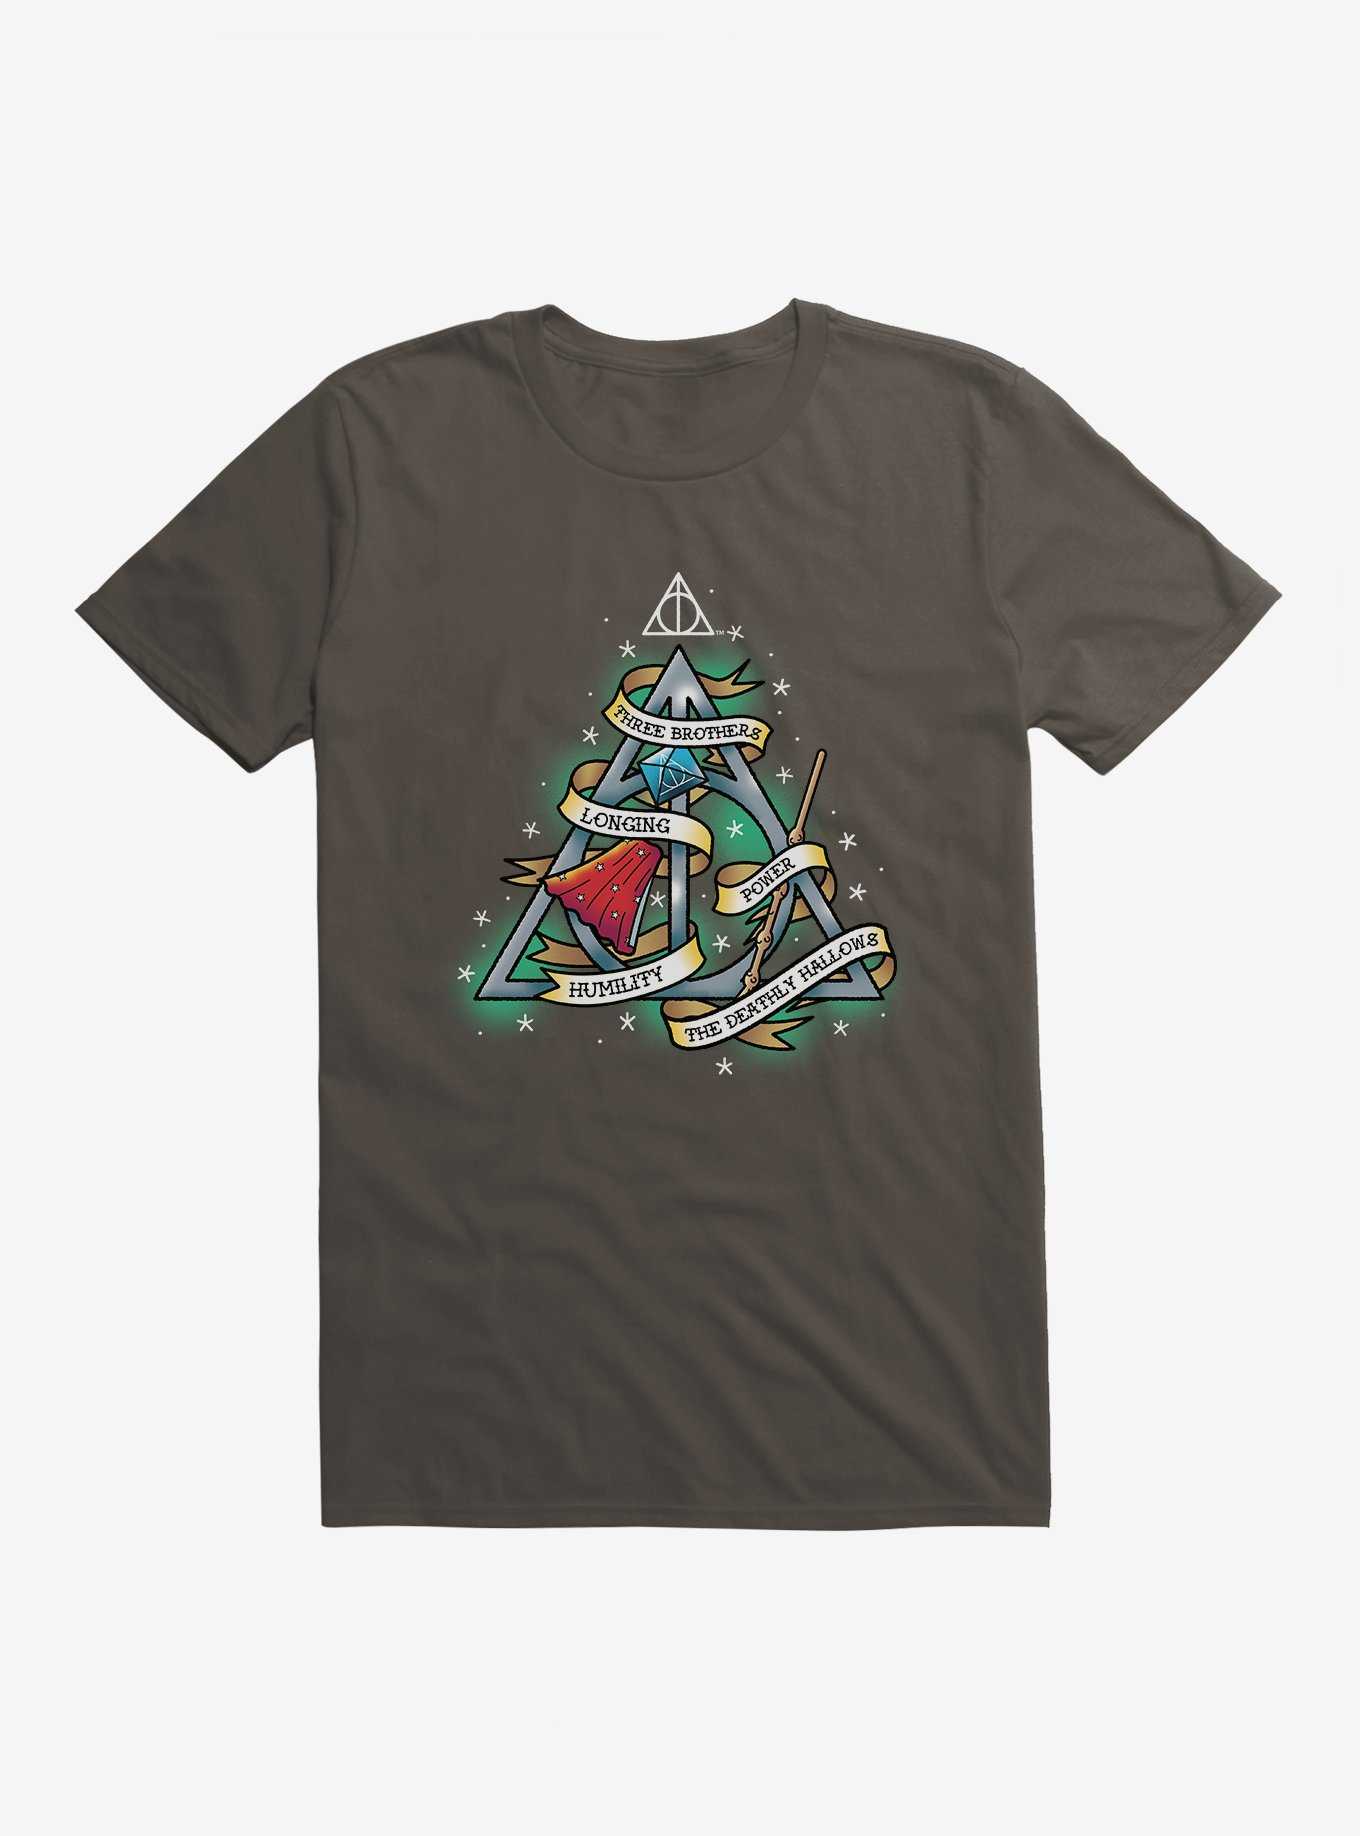 Harry Potter Deathly Hallows Tattoo Graphic T-Shirt, , hi-res